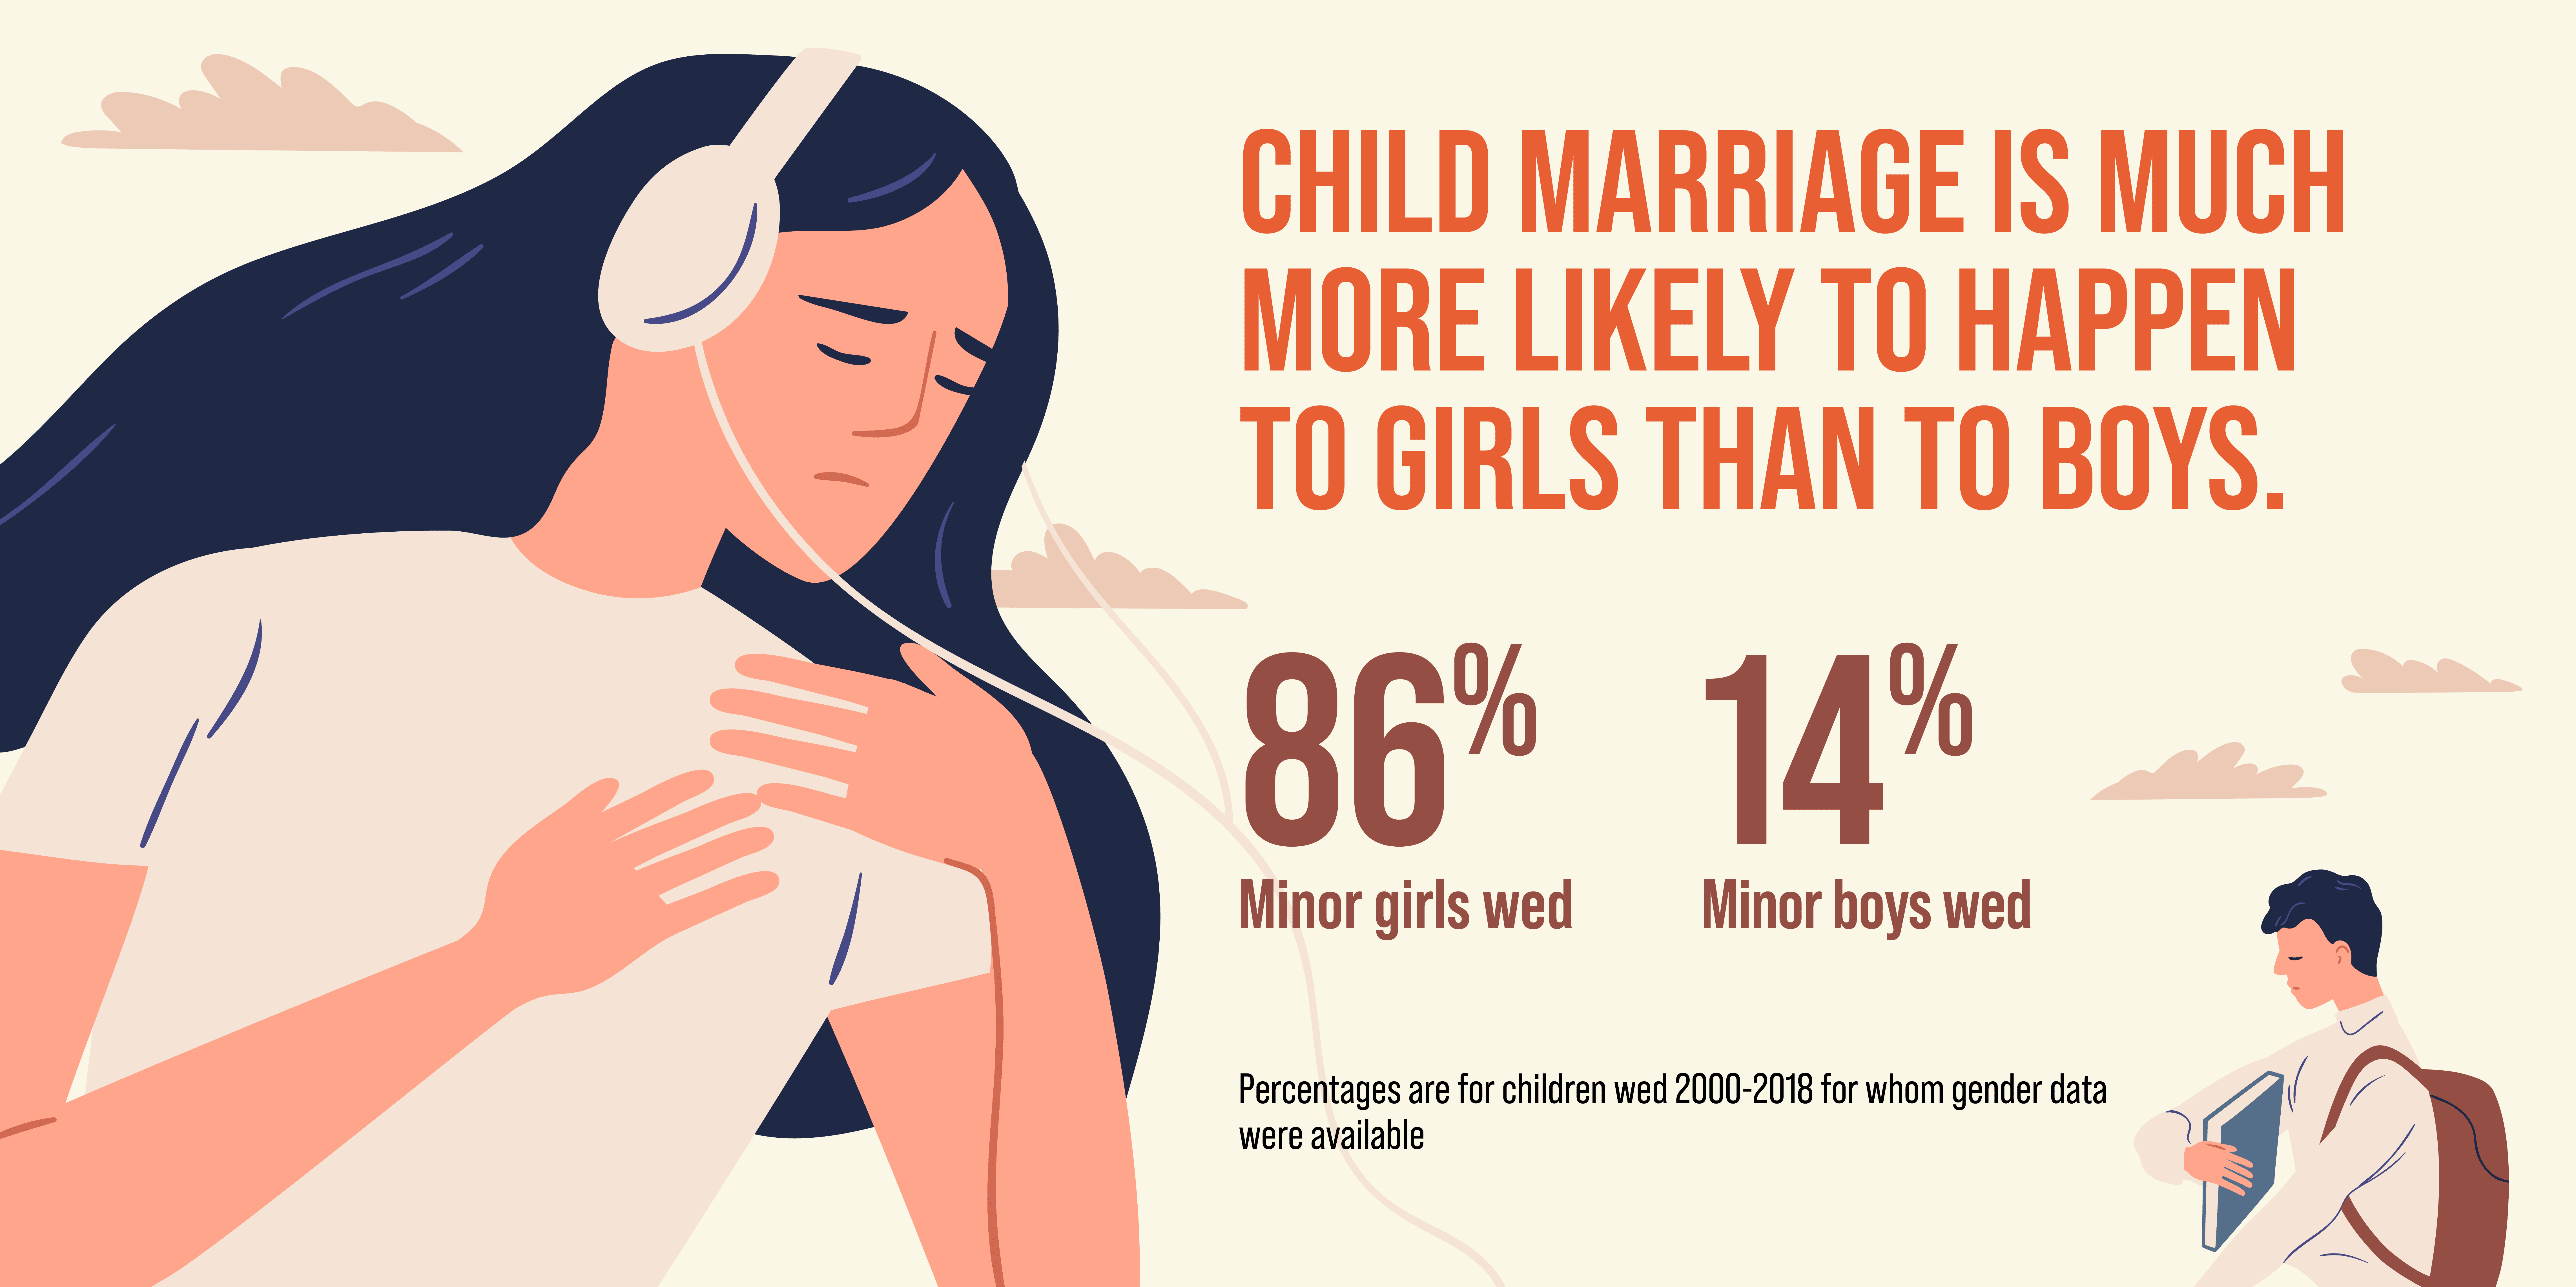 Graphic: Child marriage is much more likely to happen to girls than to boys: 86% = minor girls wed. 14% = minor boys wed. Percentages are for children wed 2000-2018 for whom gender data were available.